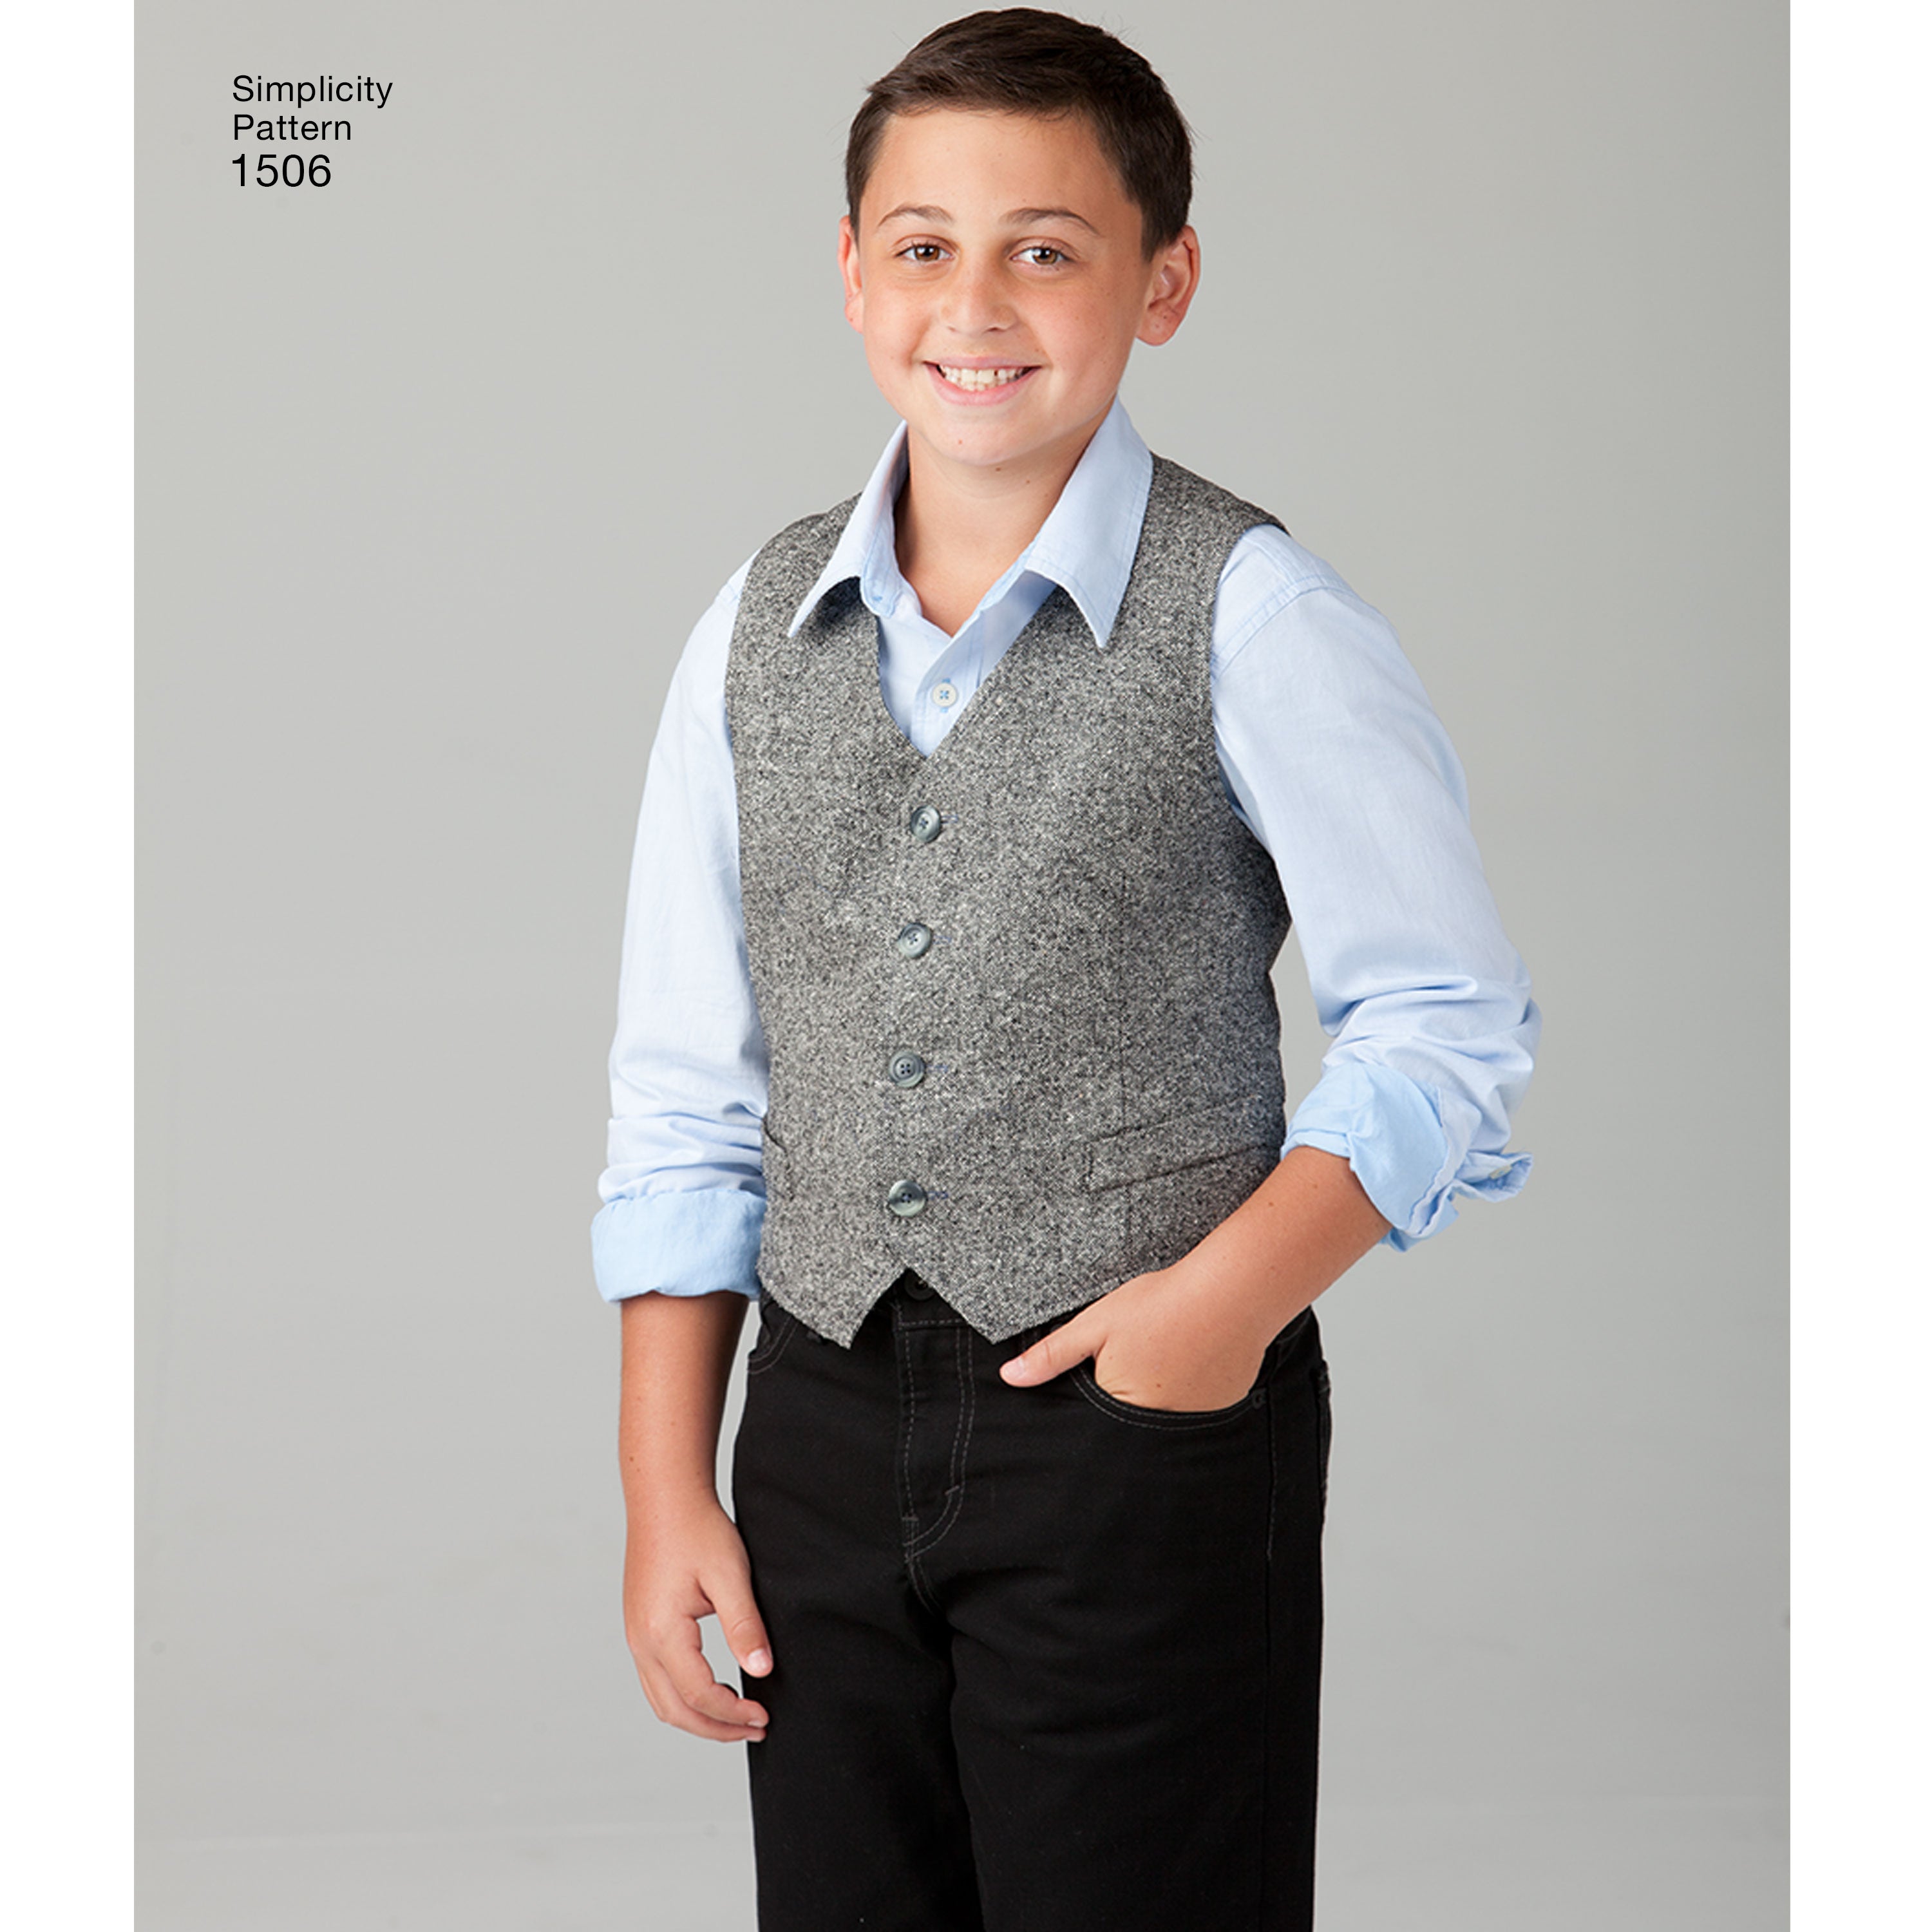 Simplicity Pattern 1506 Boy's and big and tall men's waistcoat pattern from Jaycotts Sewing Supplies